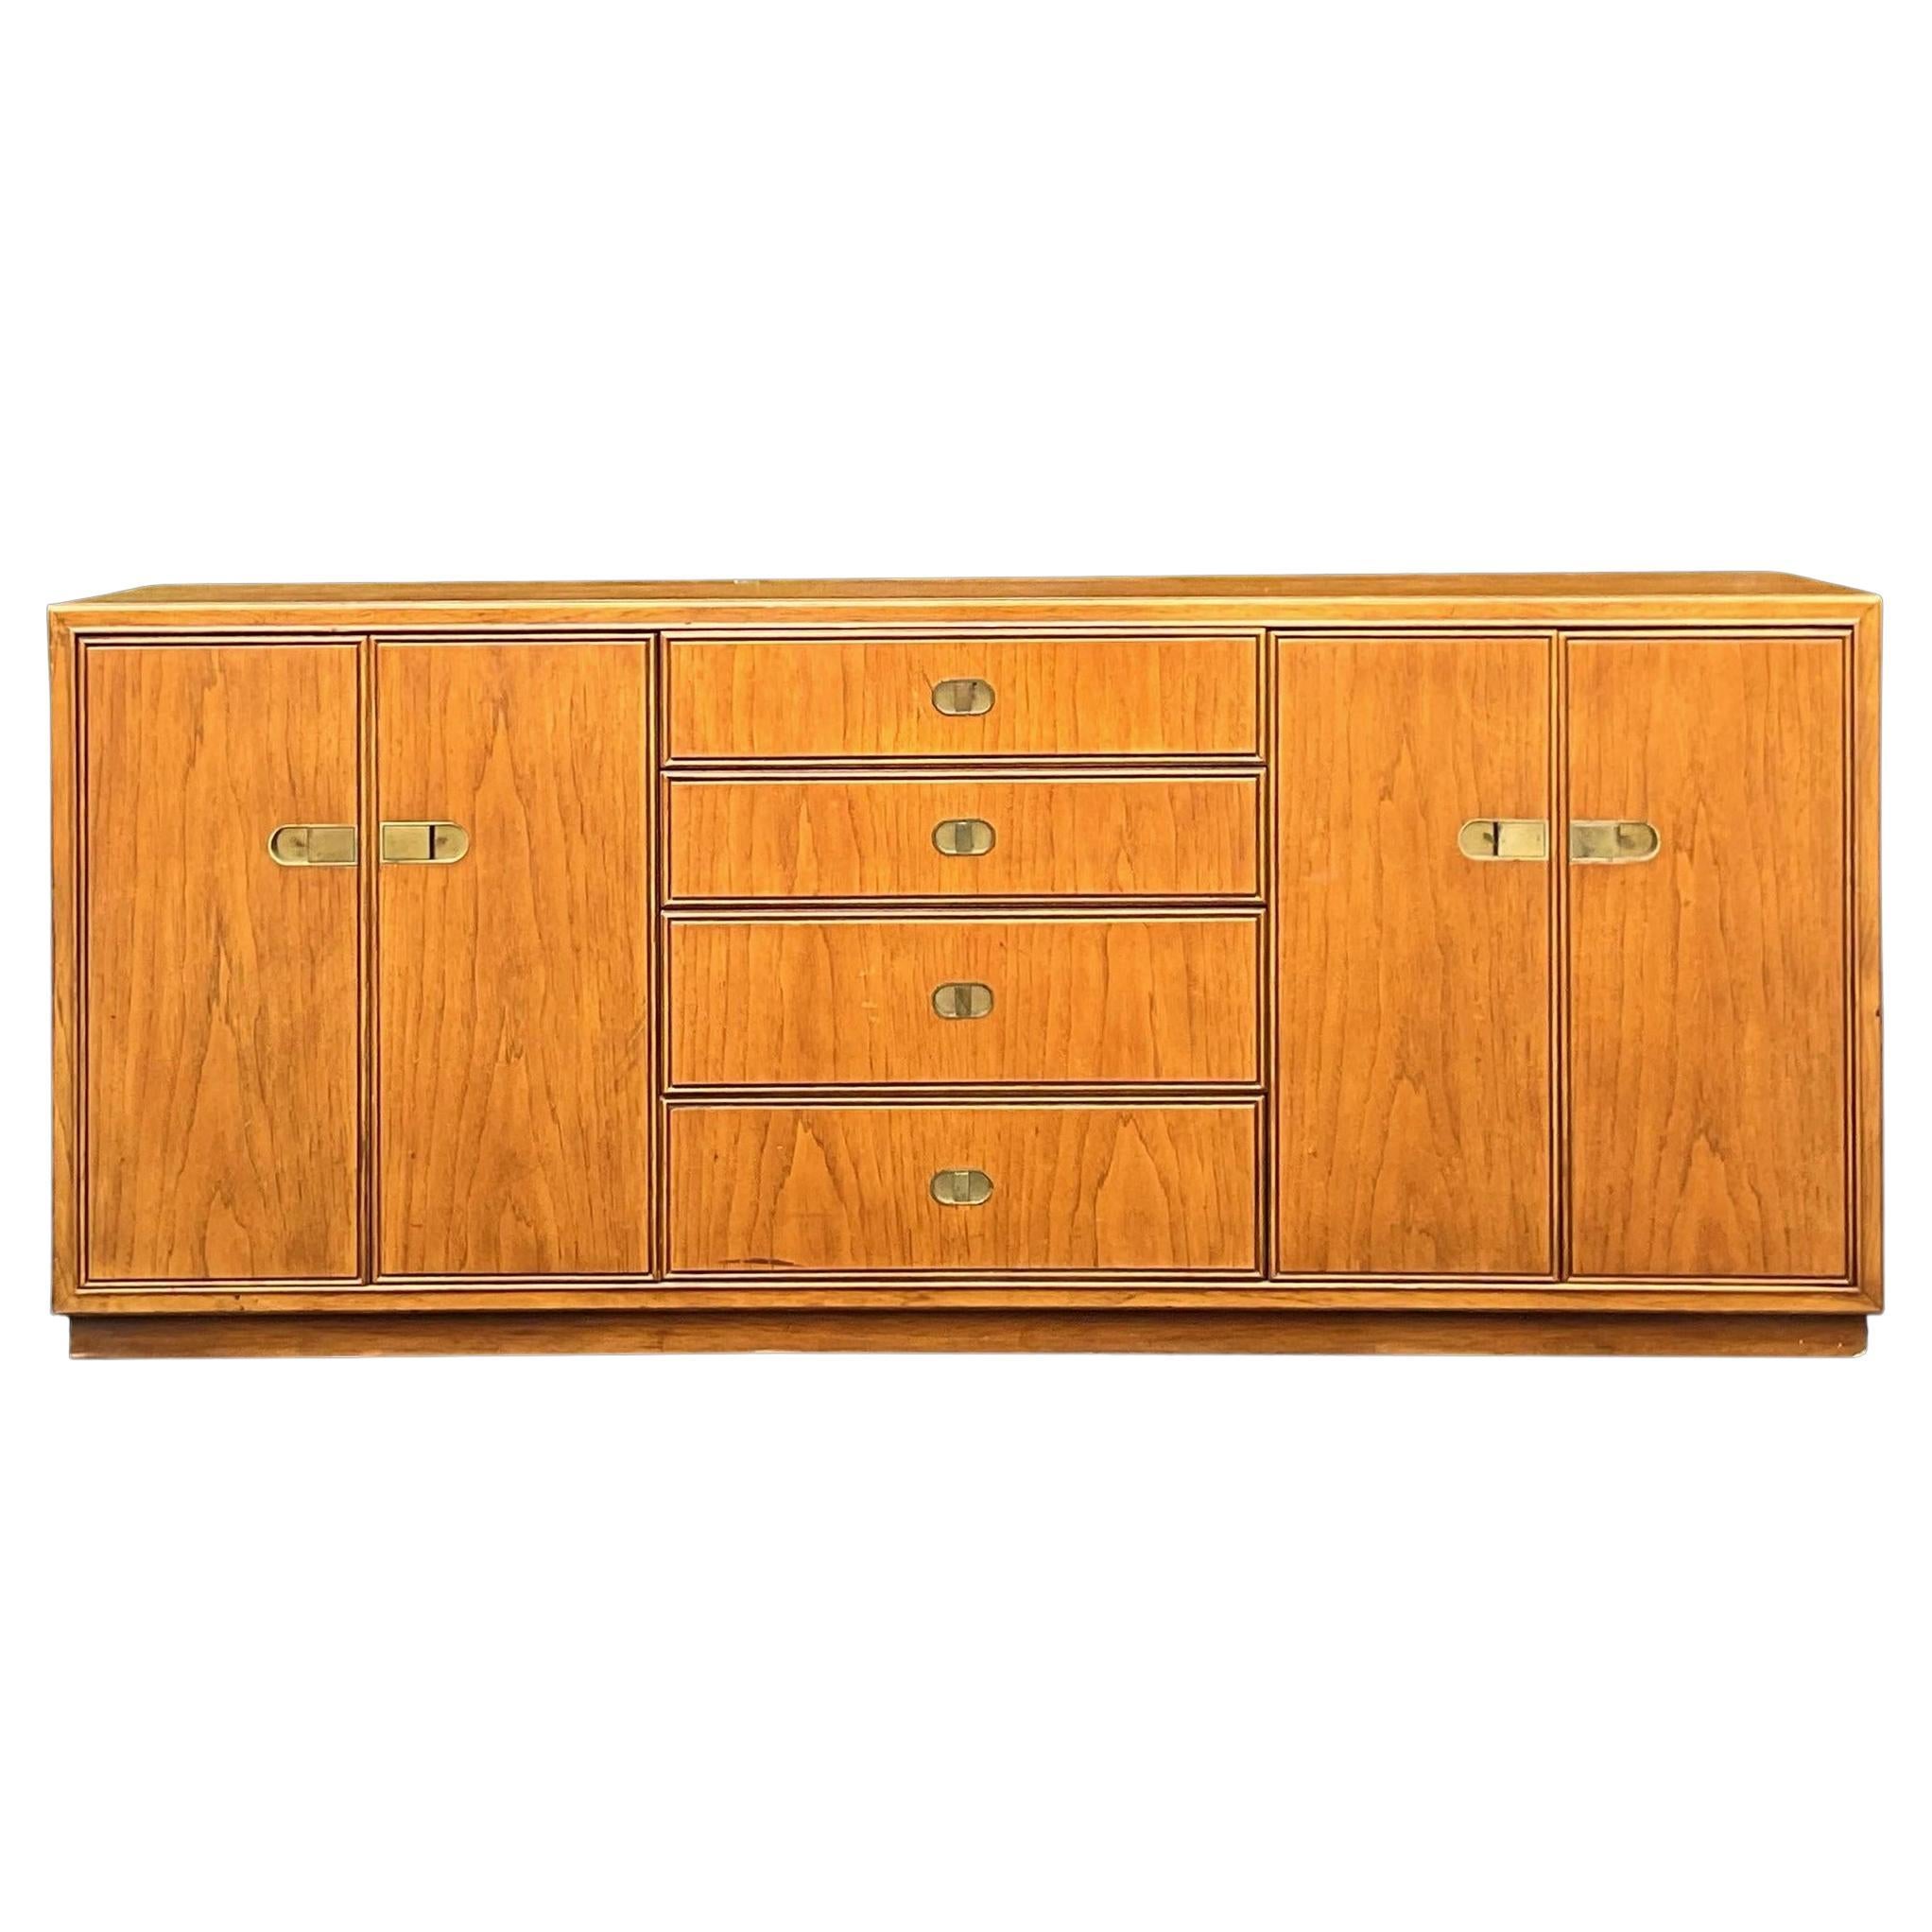 Late 20th Century Vintage Drexel Three Section Credenza